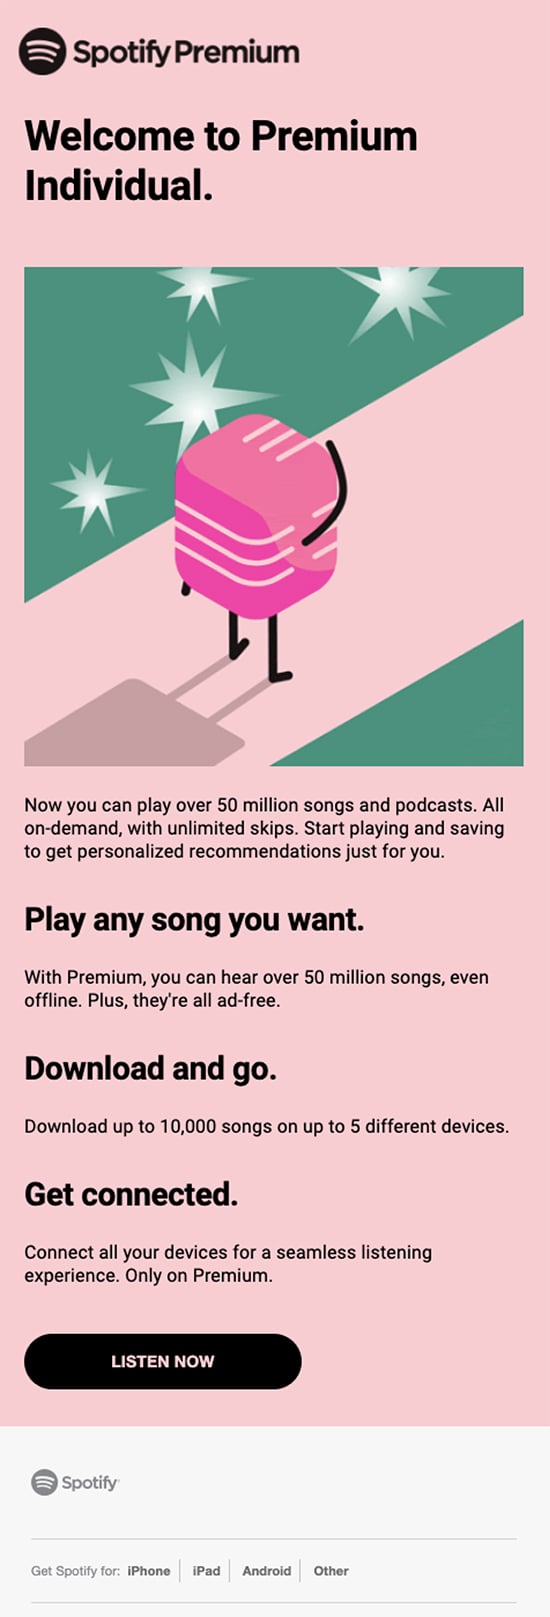 Educate Customers, Spotify graphic. 